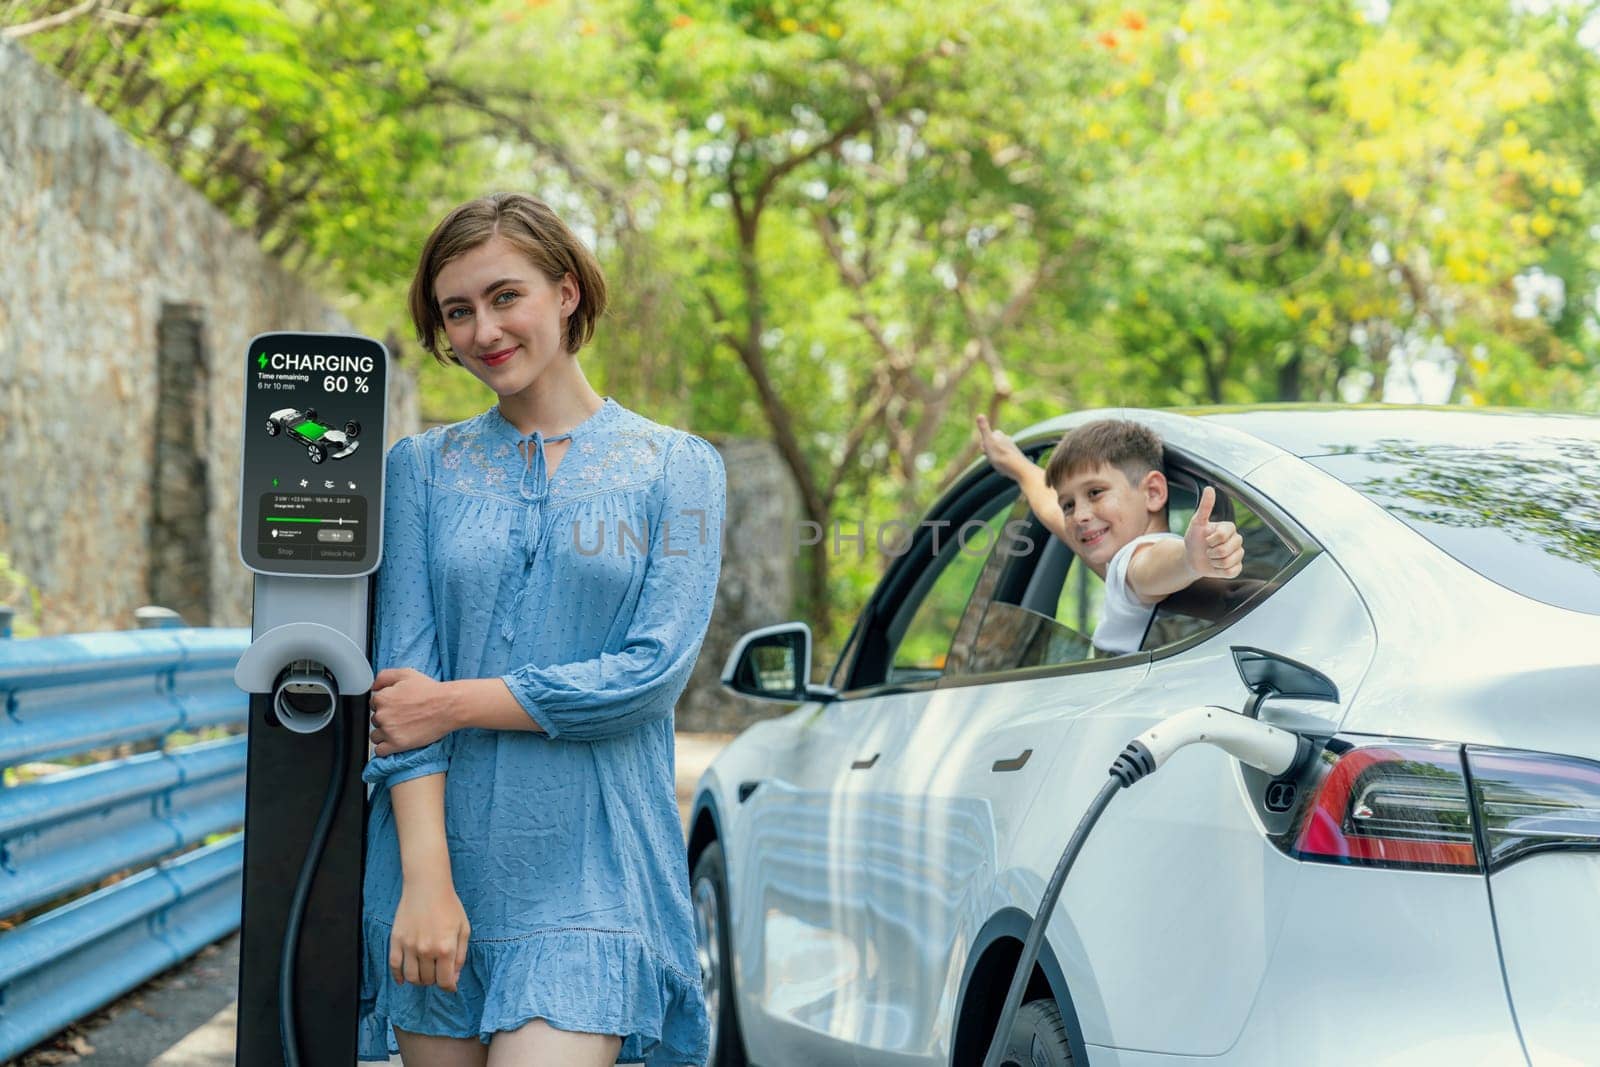 Family road trip vacation with electric vehicle, mother and son recharge EV car with green and clean energy. Nature and travel with eco-friendly car for sustainable environment. Perpetual